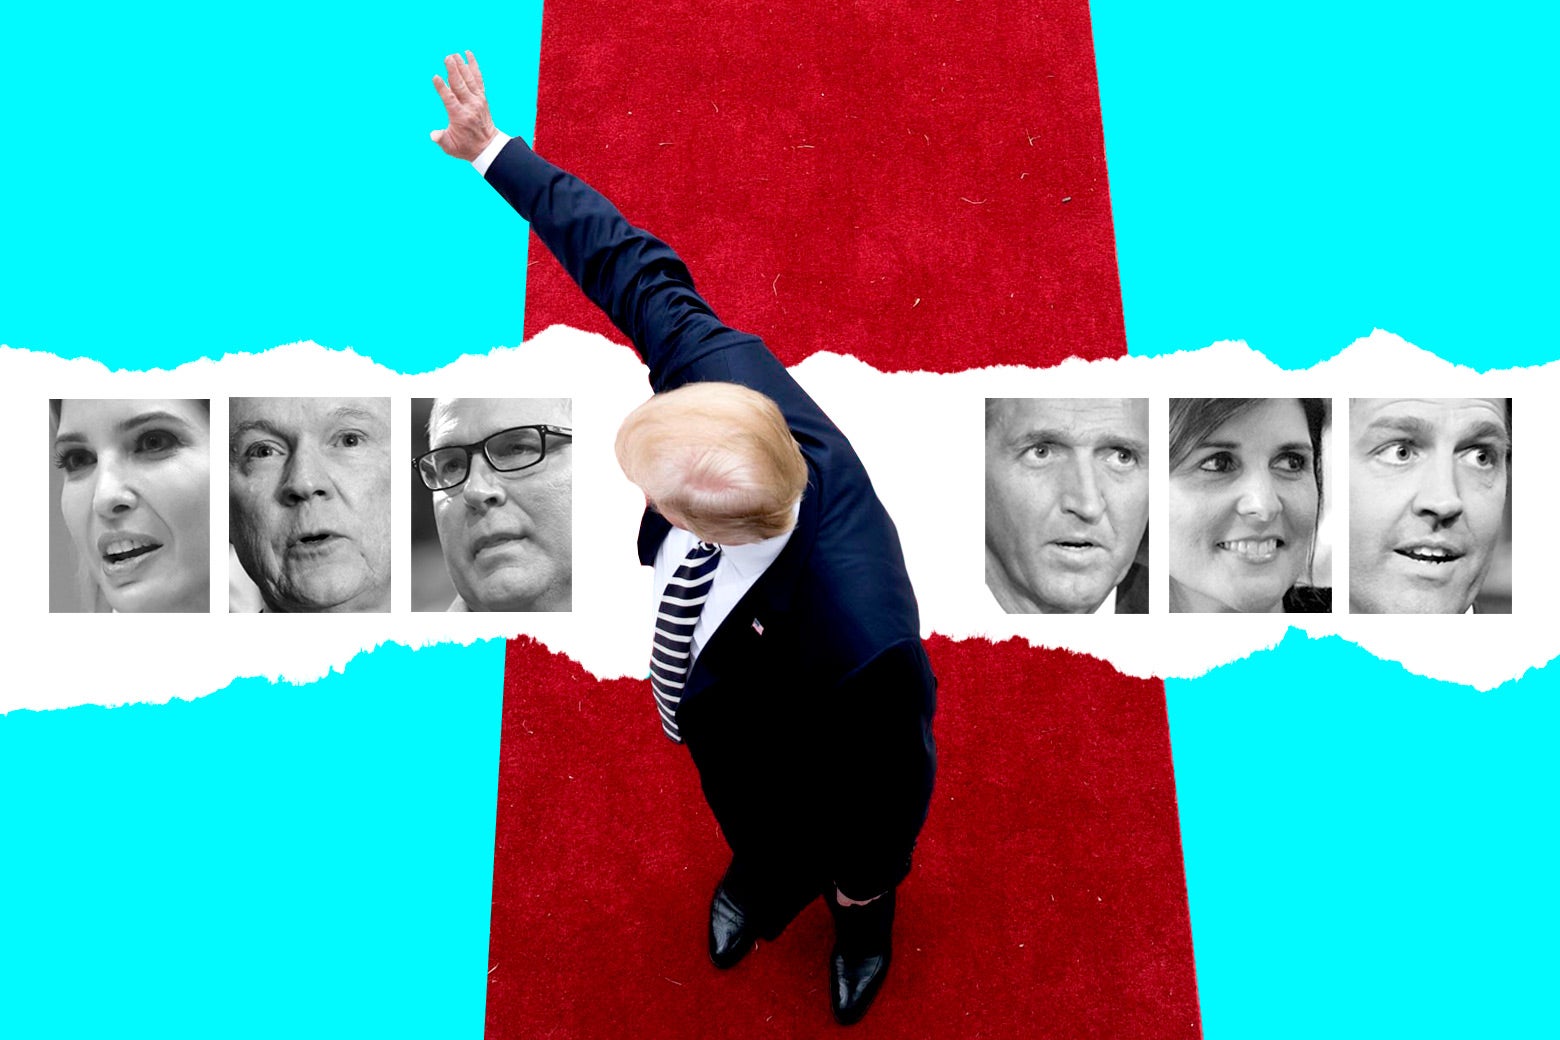 Donald Trump waves from a red carpet, with photos collaged in of Ivanka Trump, Jeff Sessions, and Scott Pruitt on one side, and Jeff Flake, Nikki Haley, and Ben Sasse on the other side.